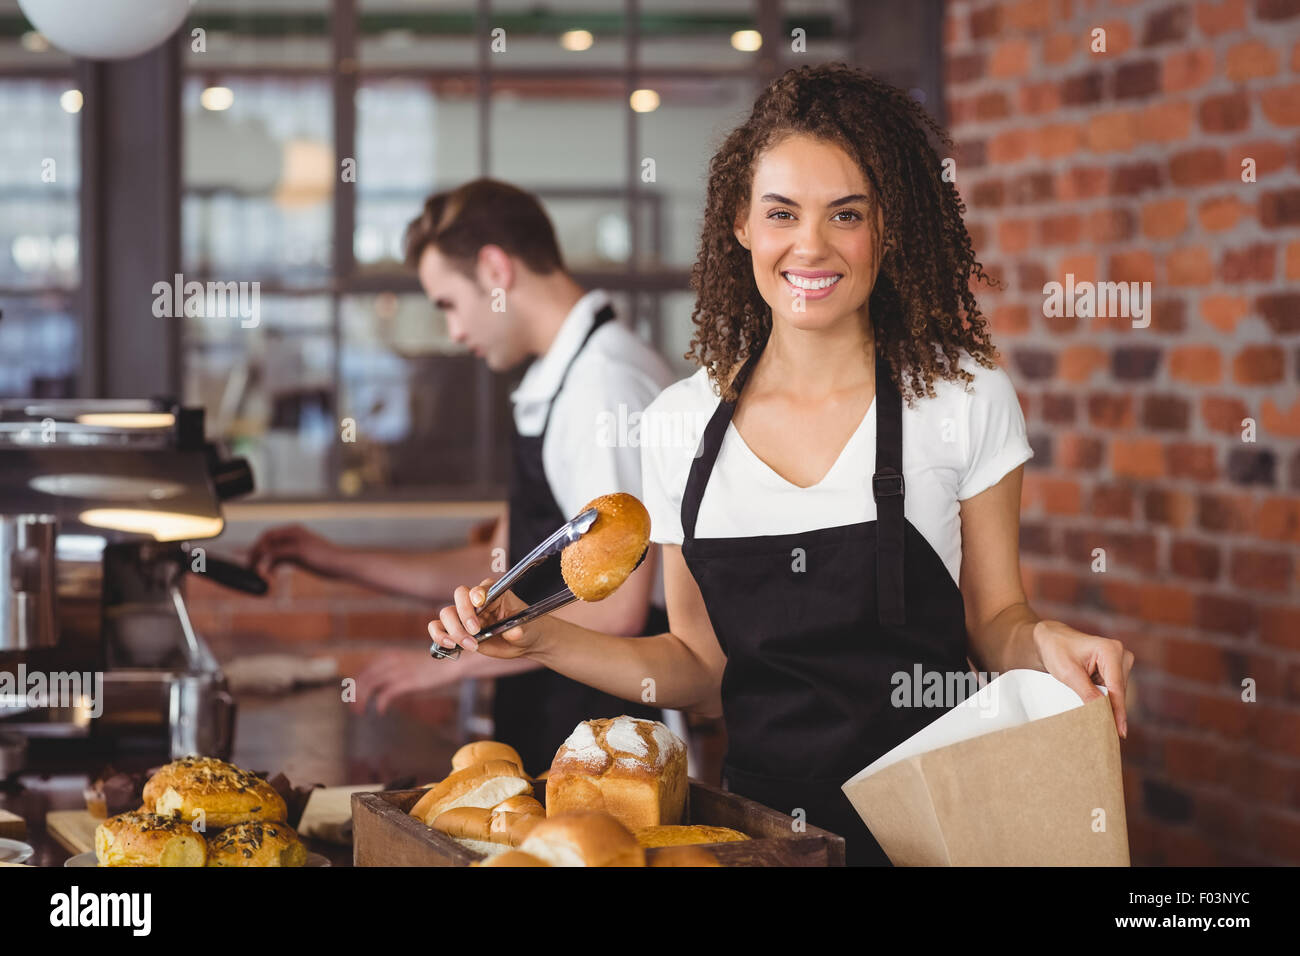 Smiling waitress putting bread roll in paper bag Stock Photo